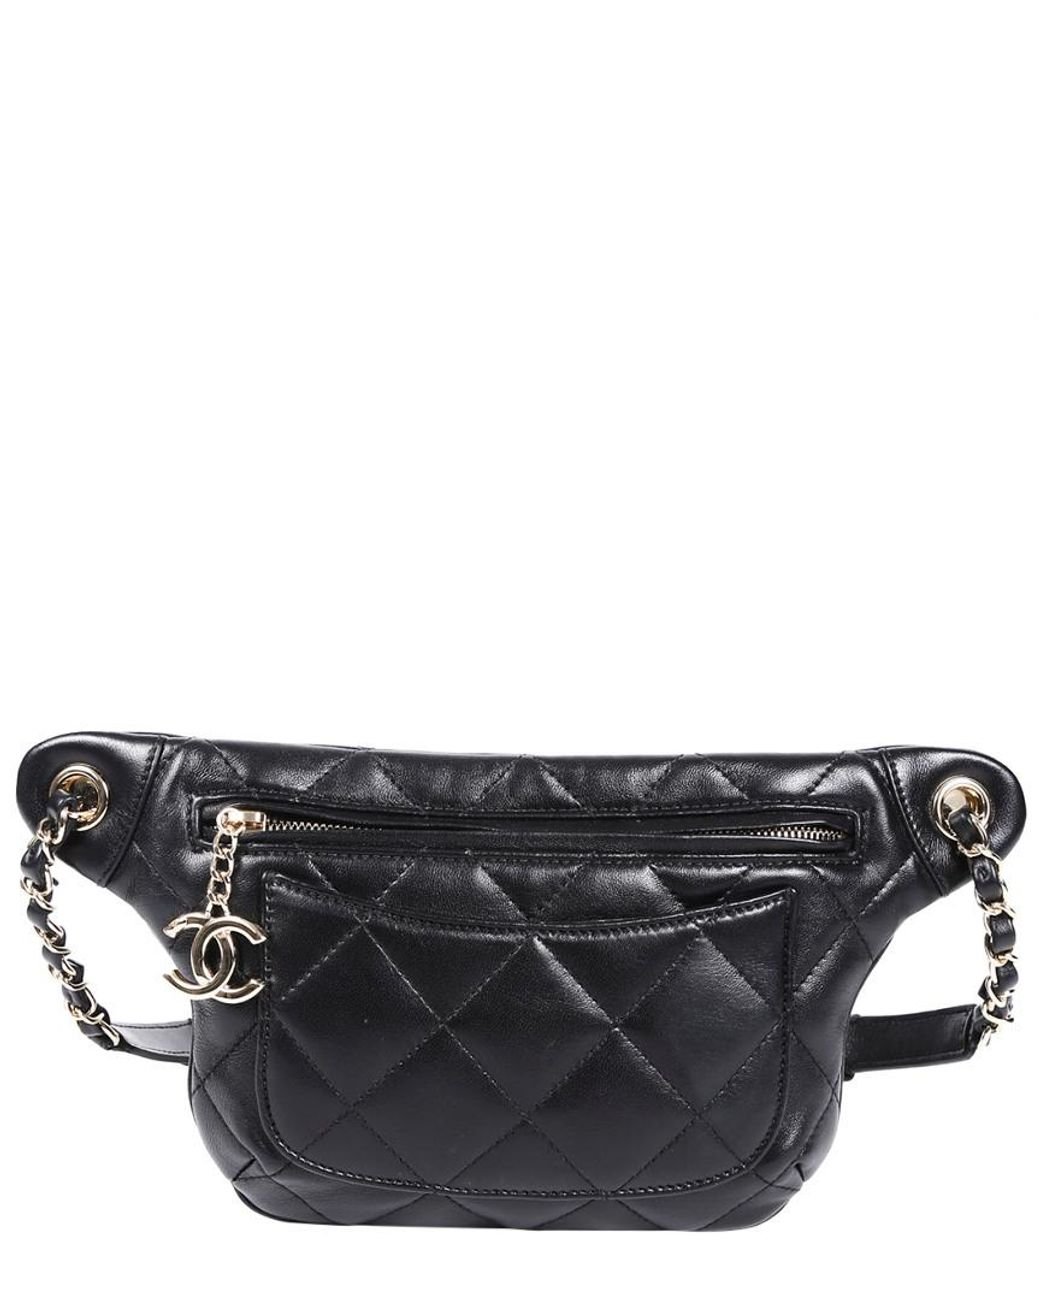 Women's Chanel Belt Bags, waist bags and bumbags from A$741